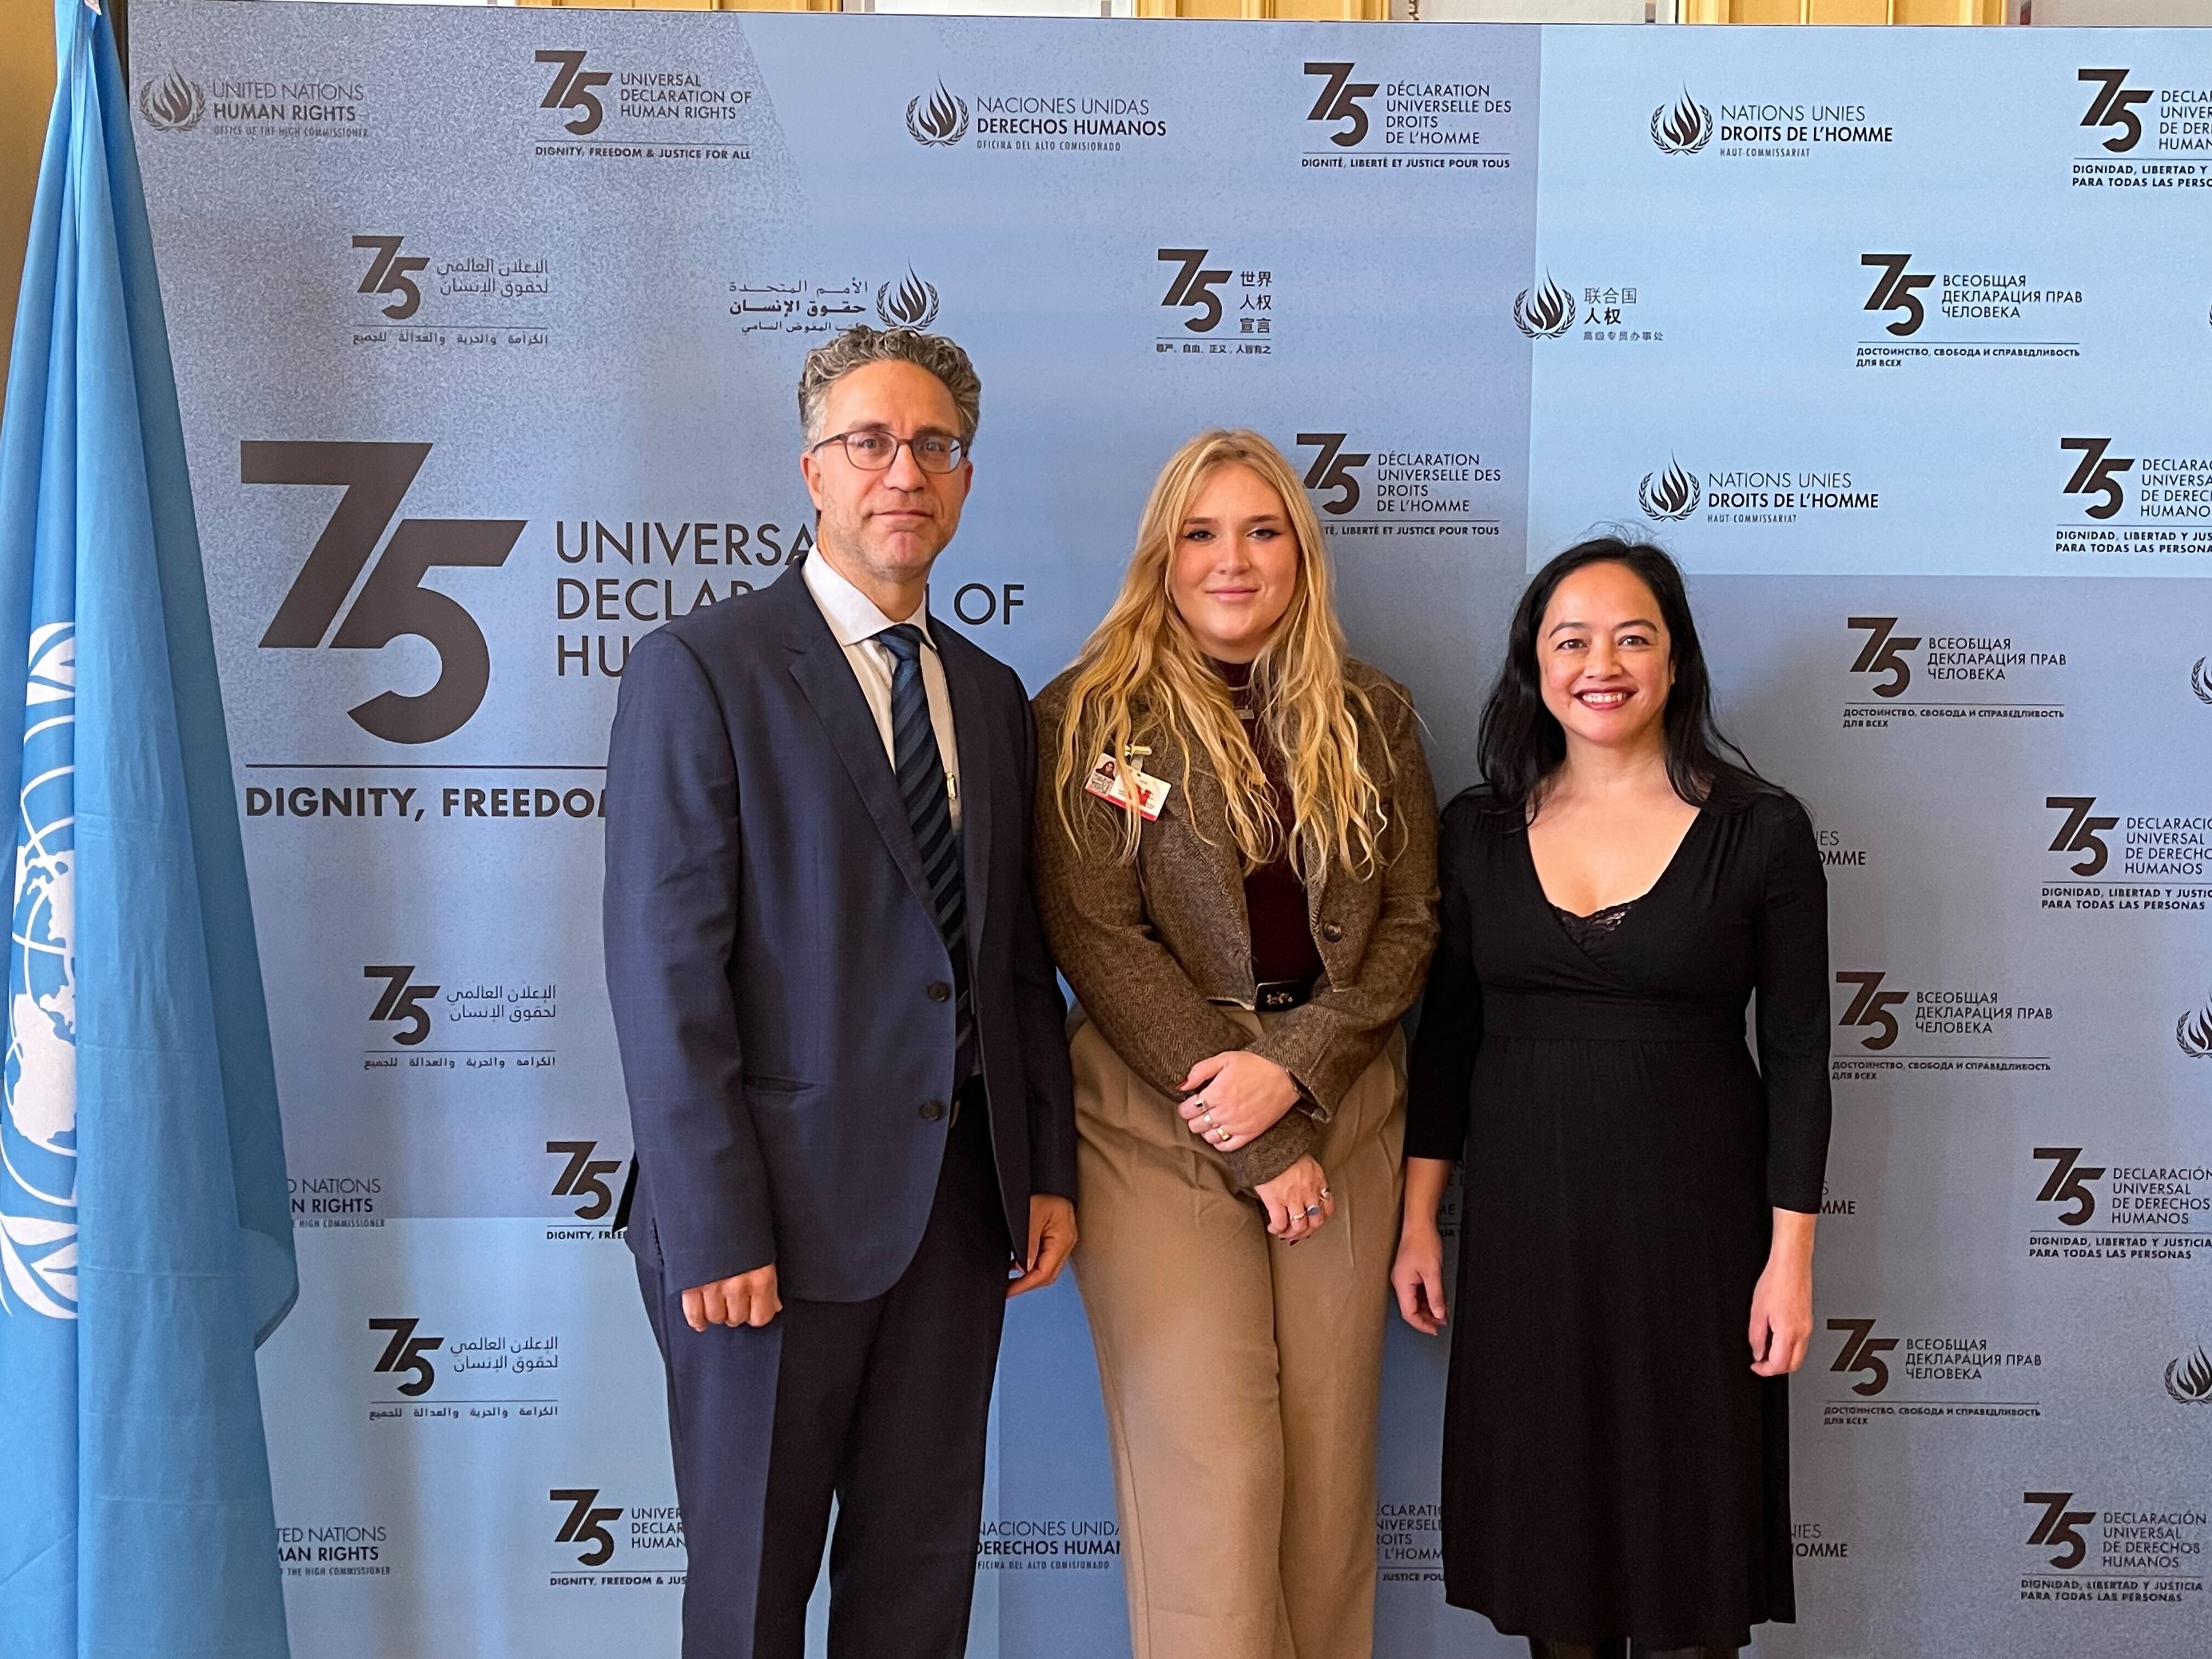 Jamil Dakwar, Human Rights Program Director at ACLU, Caroline Marks, NSCR Staff Attorney at ALC, and Gabriela Villareal, Policy Director at ALC pose for a picture in front of a UN Human Rights backdrop.